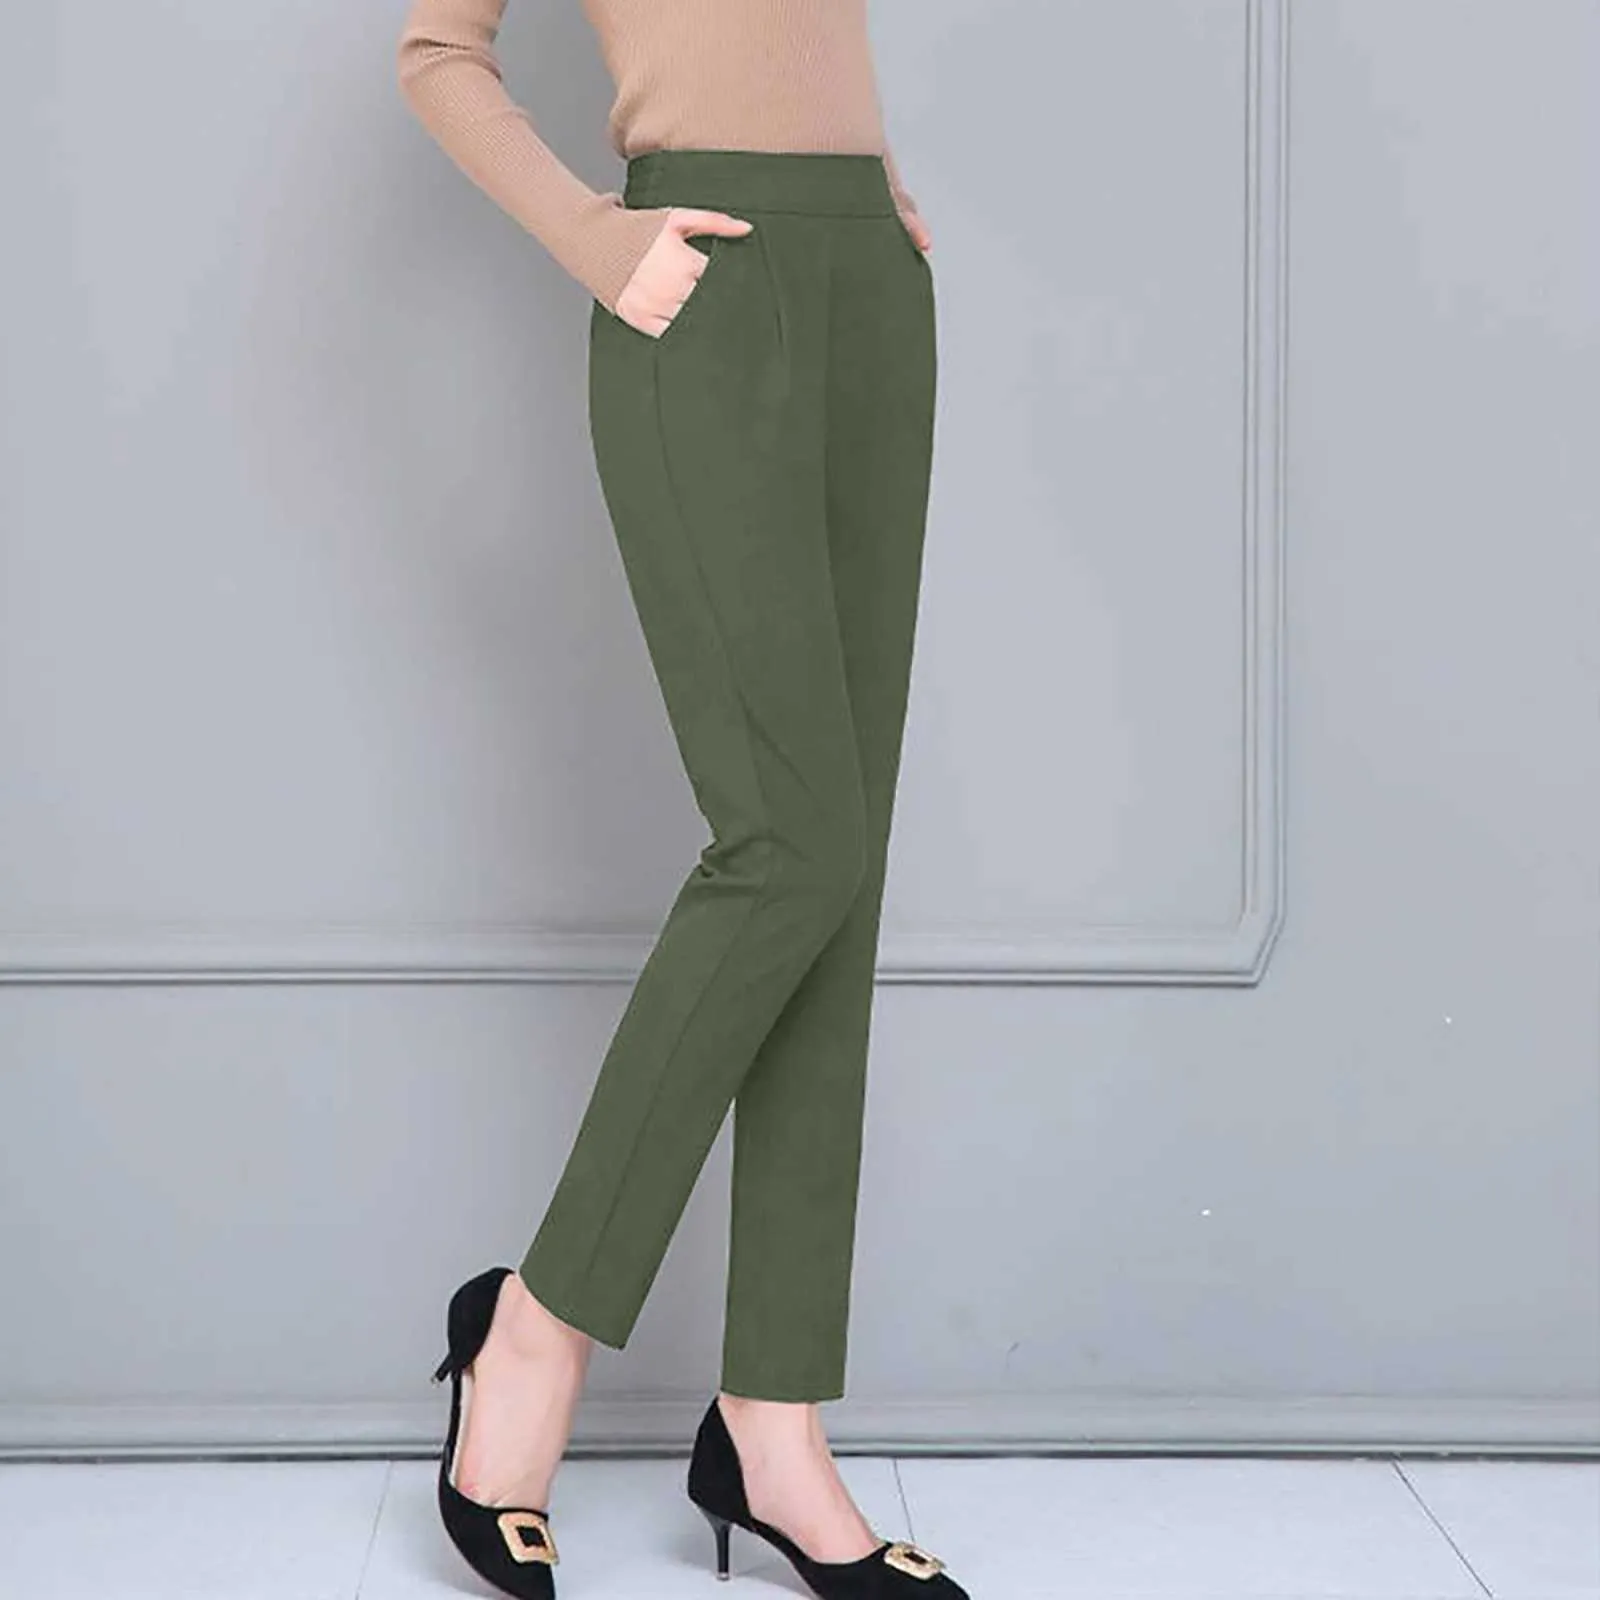 Women's trouser pant combo Pants and trousers for women Ladies' formal pants  and trousers Women's office